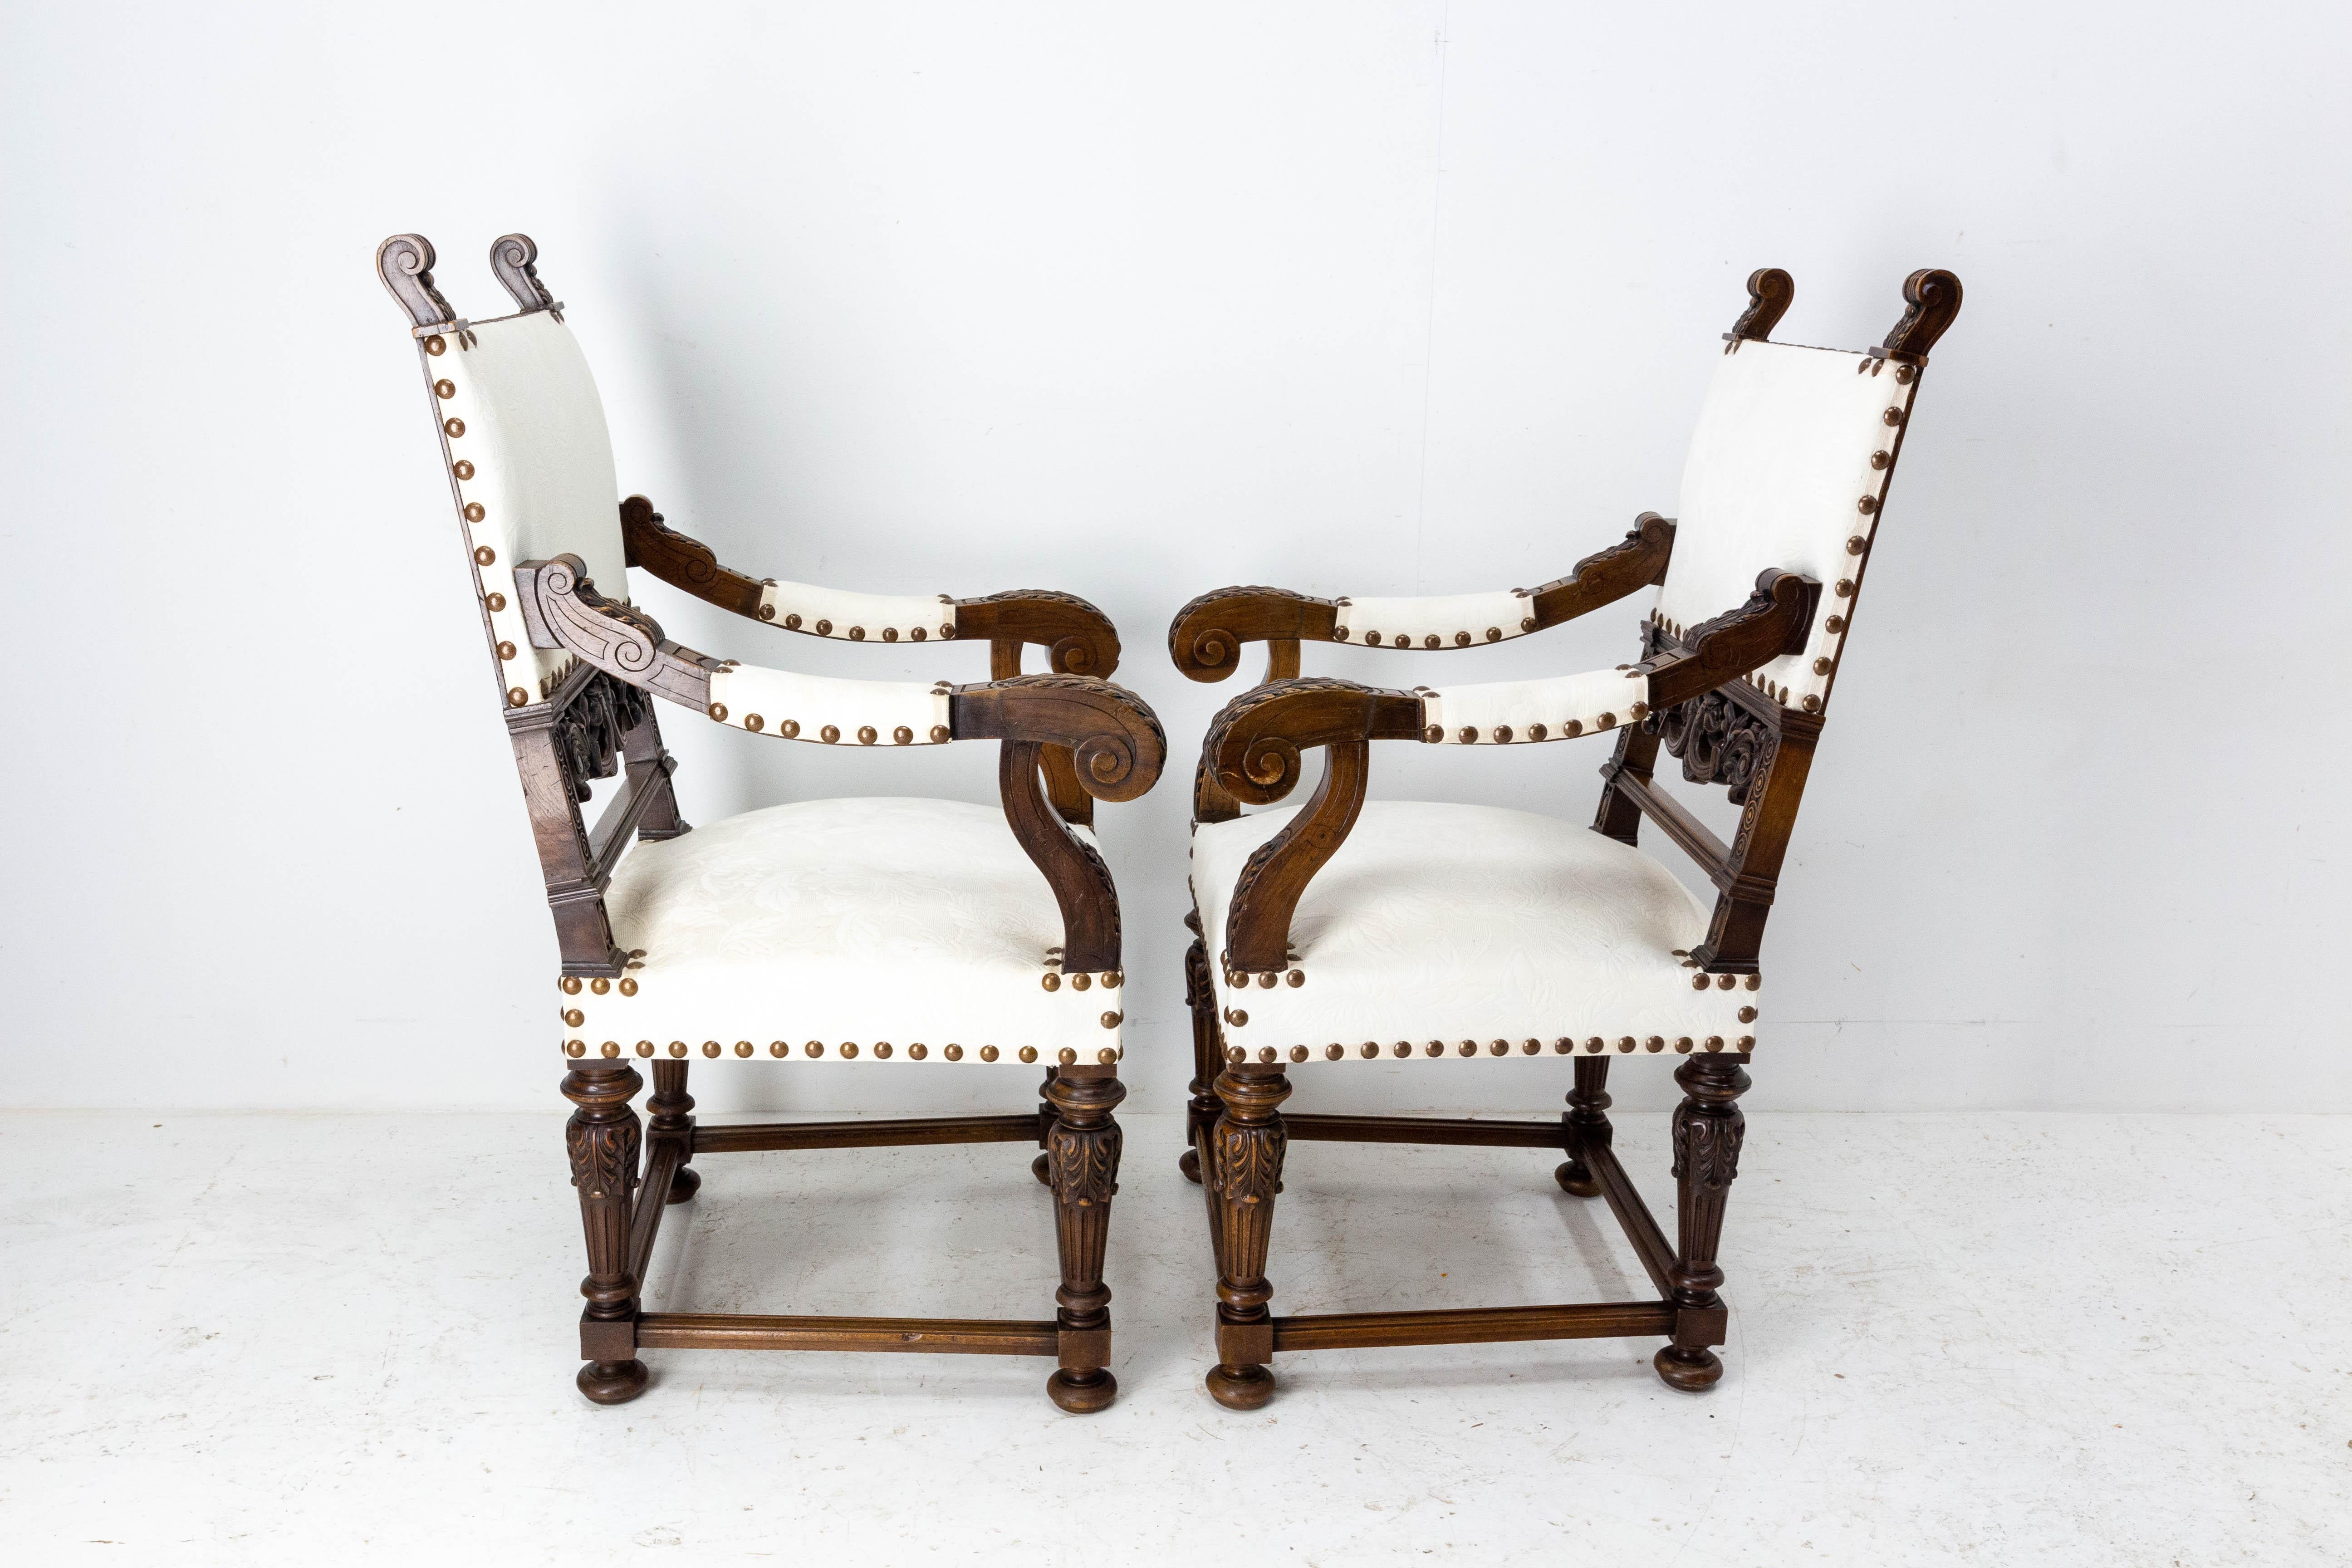 Pair of Louis XIII Revival Open Walnut Armchairs French, 19th Century to Recover For Sale 2